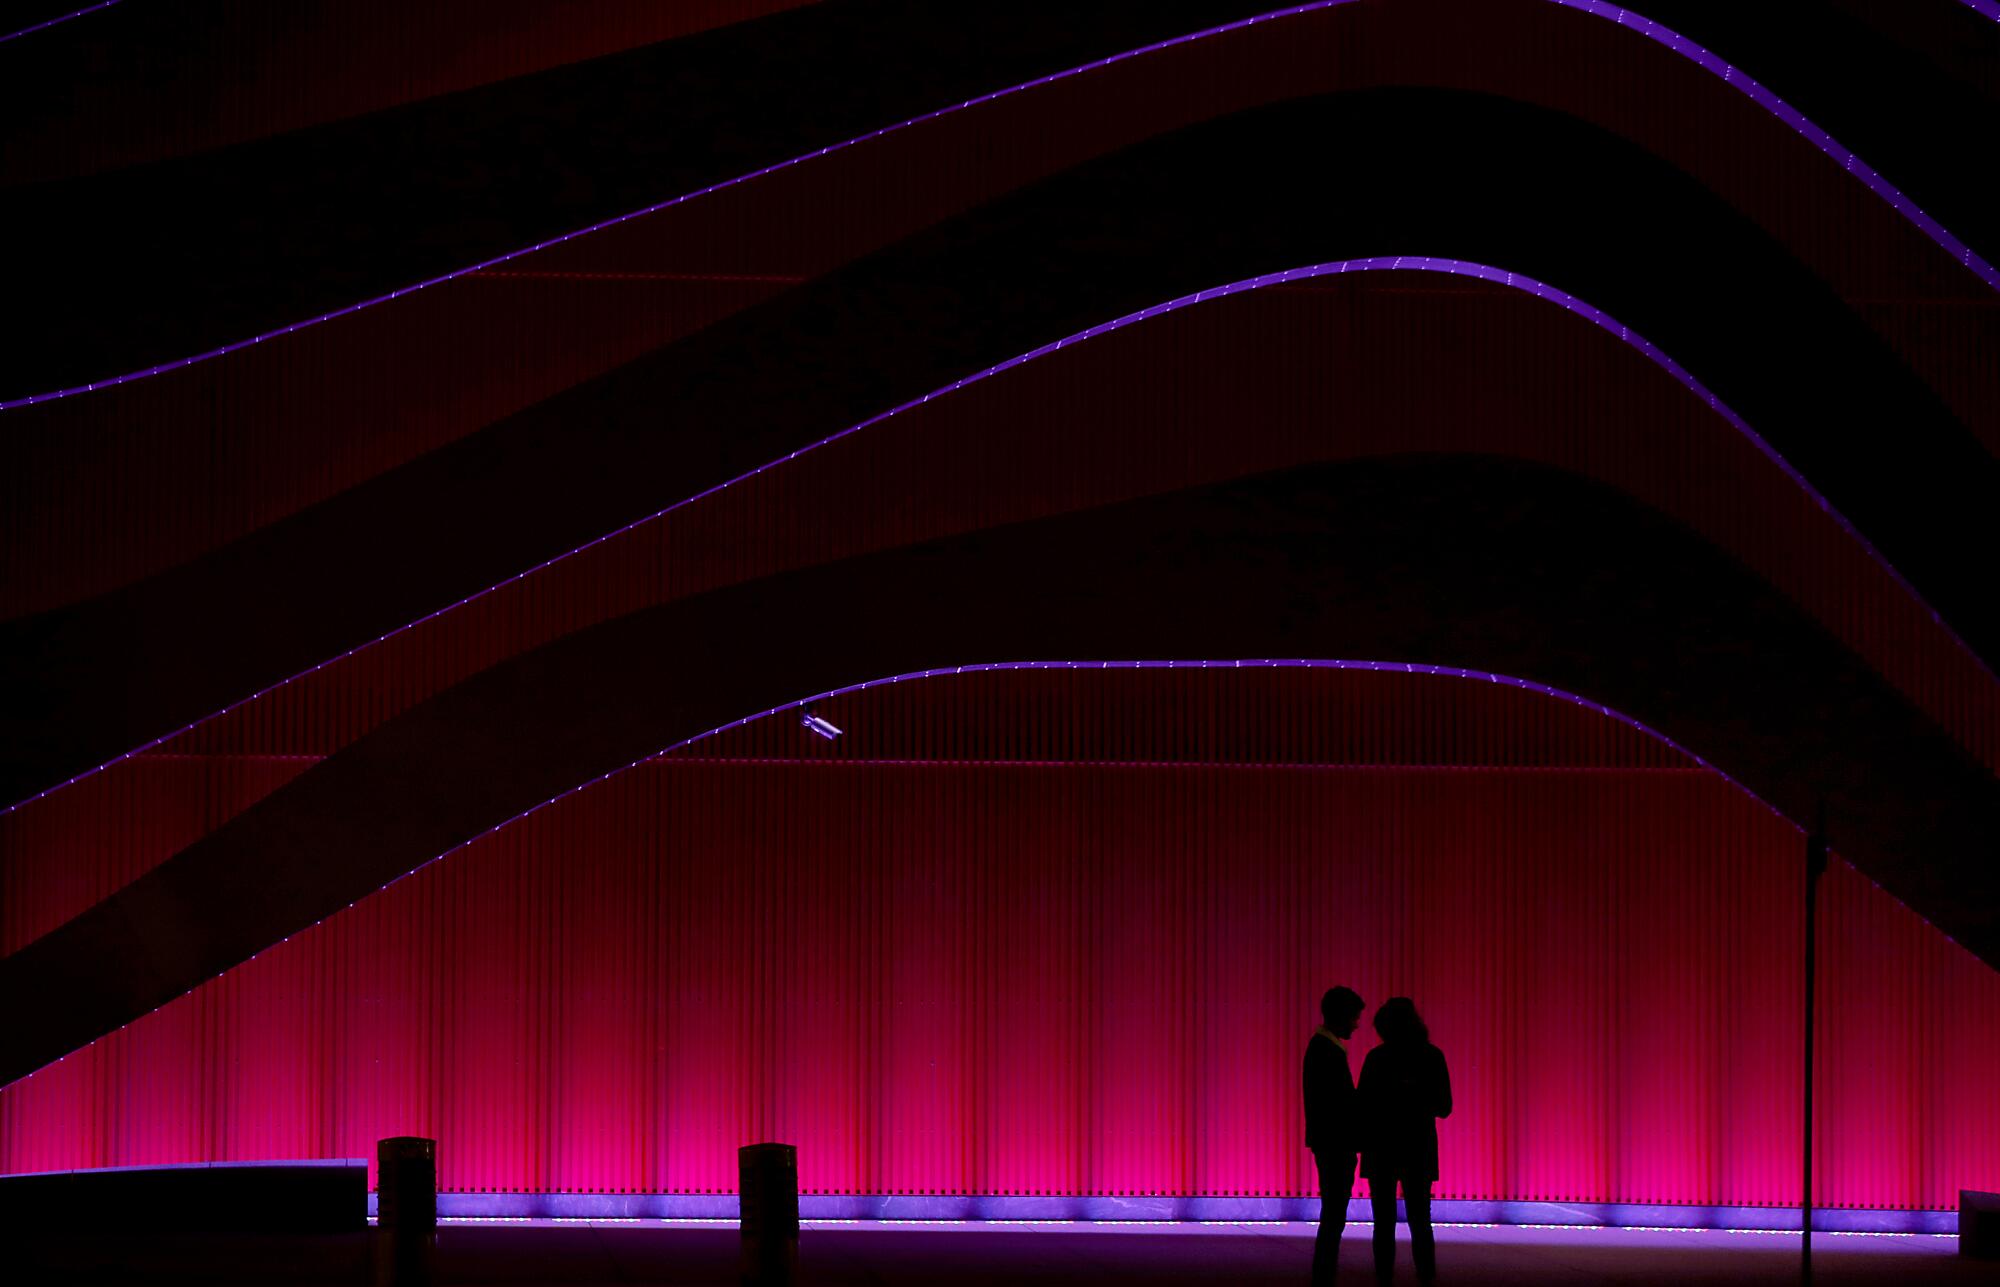 A couple wait for a bus outside the Petersen Automotive Museum in Los Angeles.